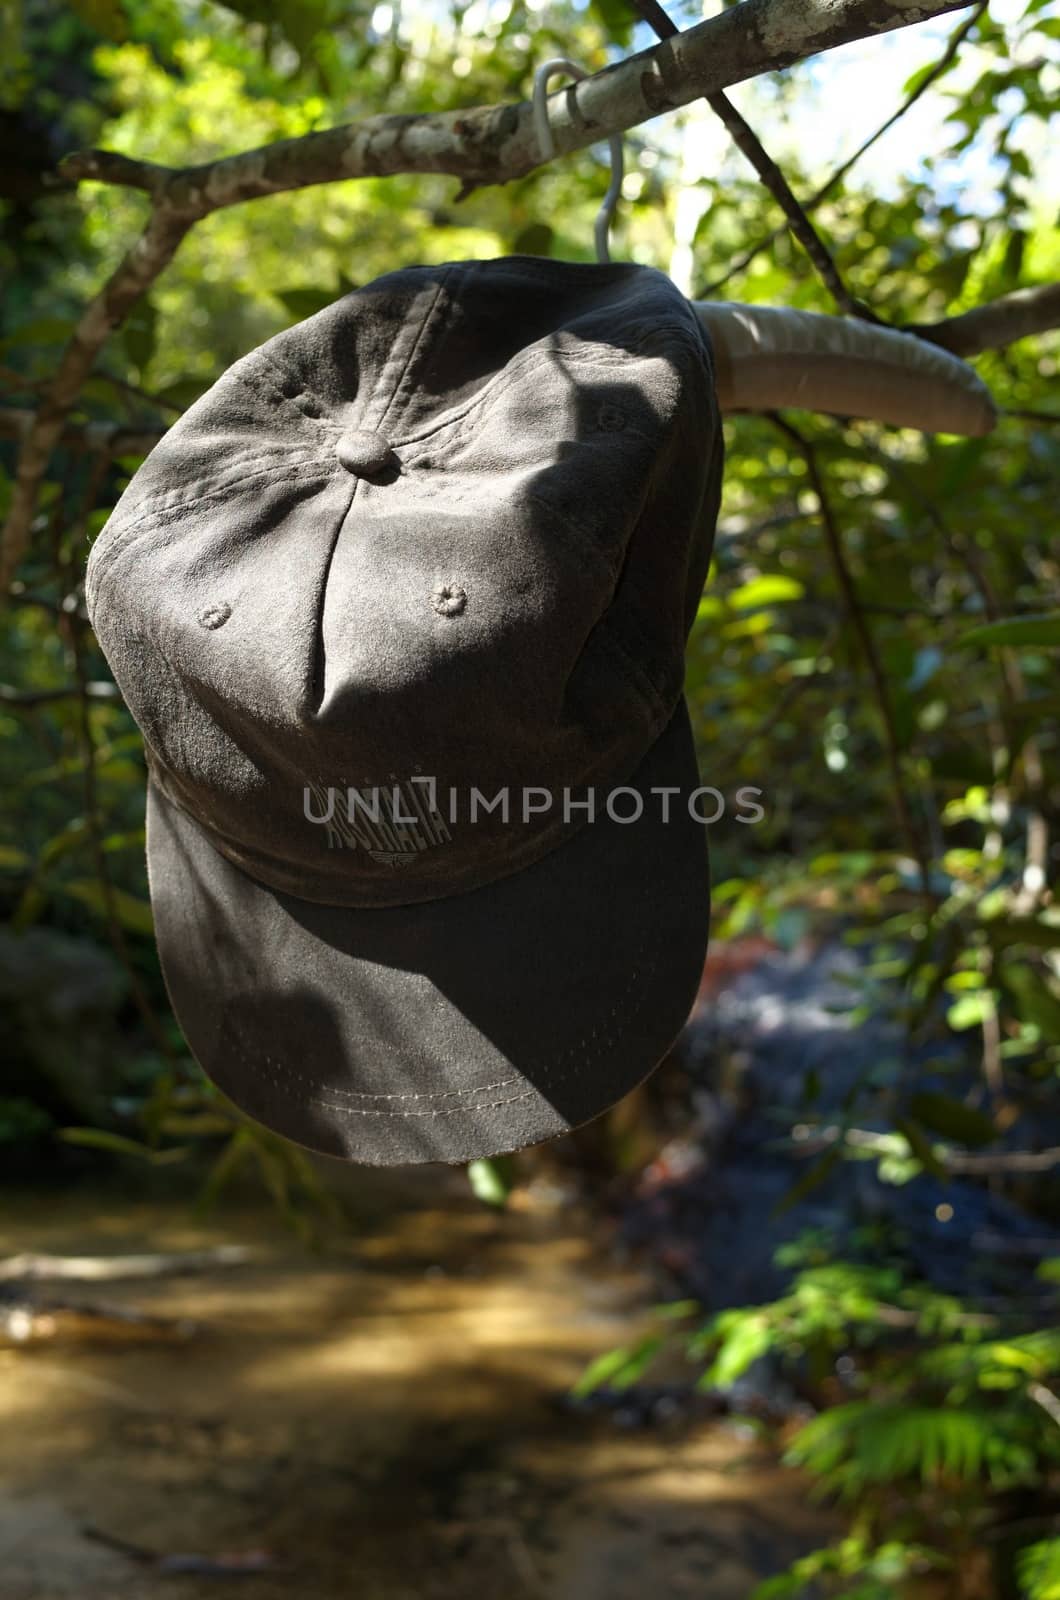 An Australia cap hanging from a tree branch on a padded clothes hanger near a waterfall